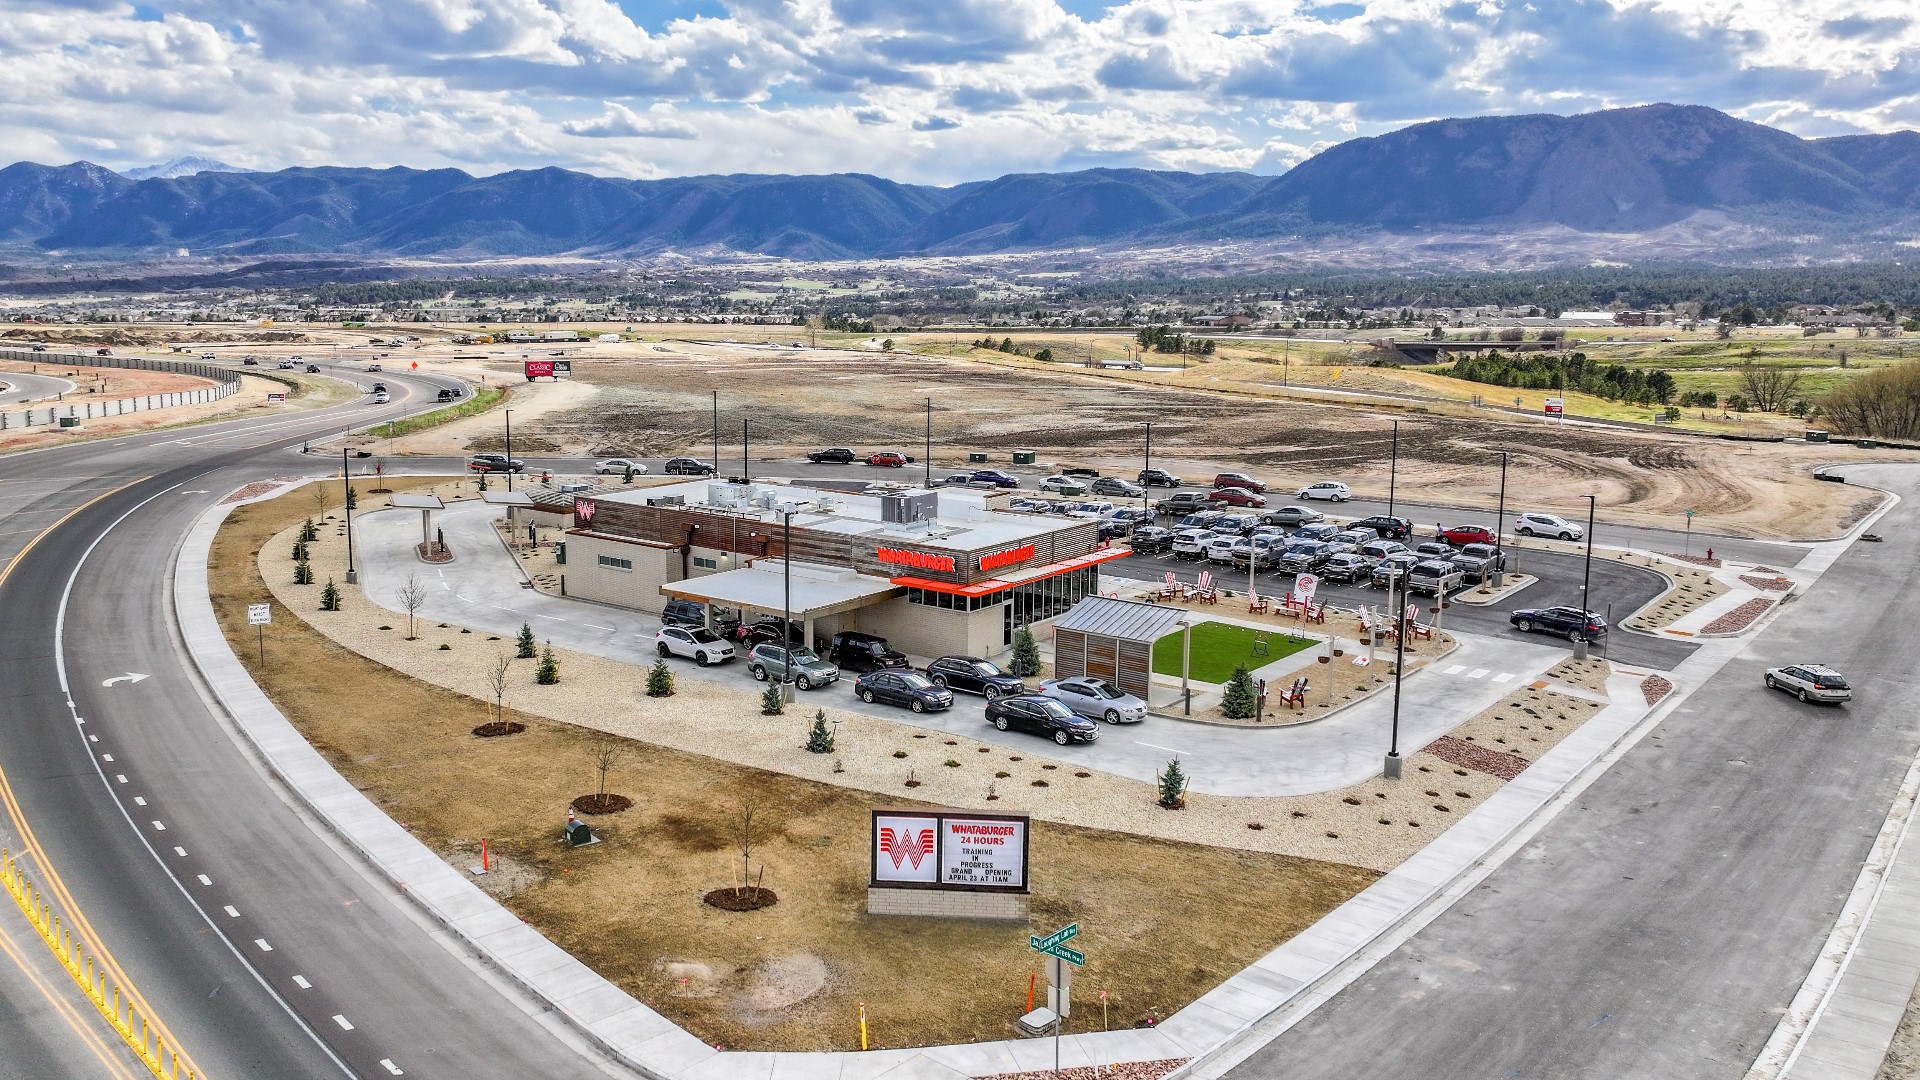 Whataburger is continuing its growth in Colorado with a new restaurant south of Denver in Monument.